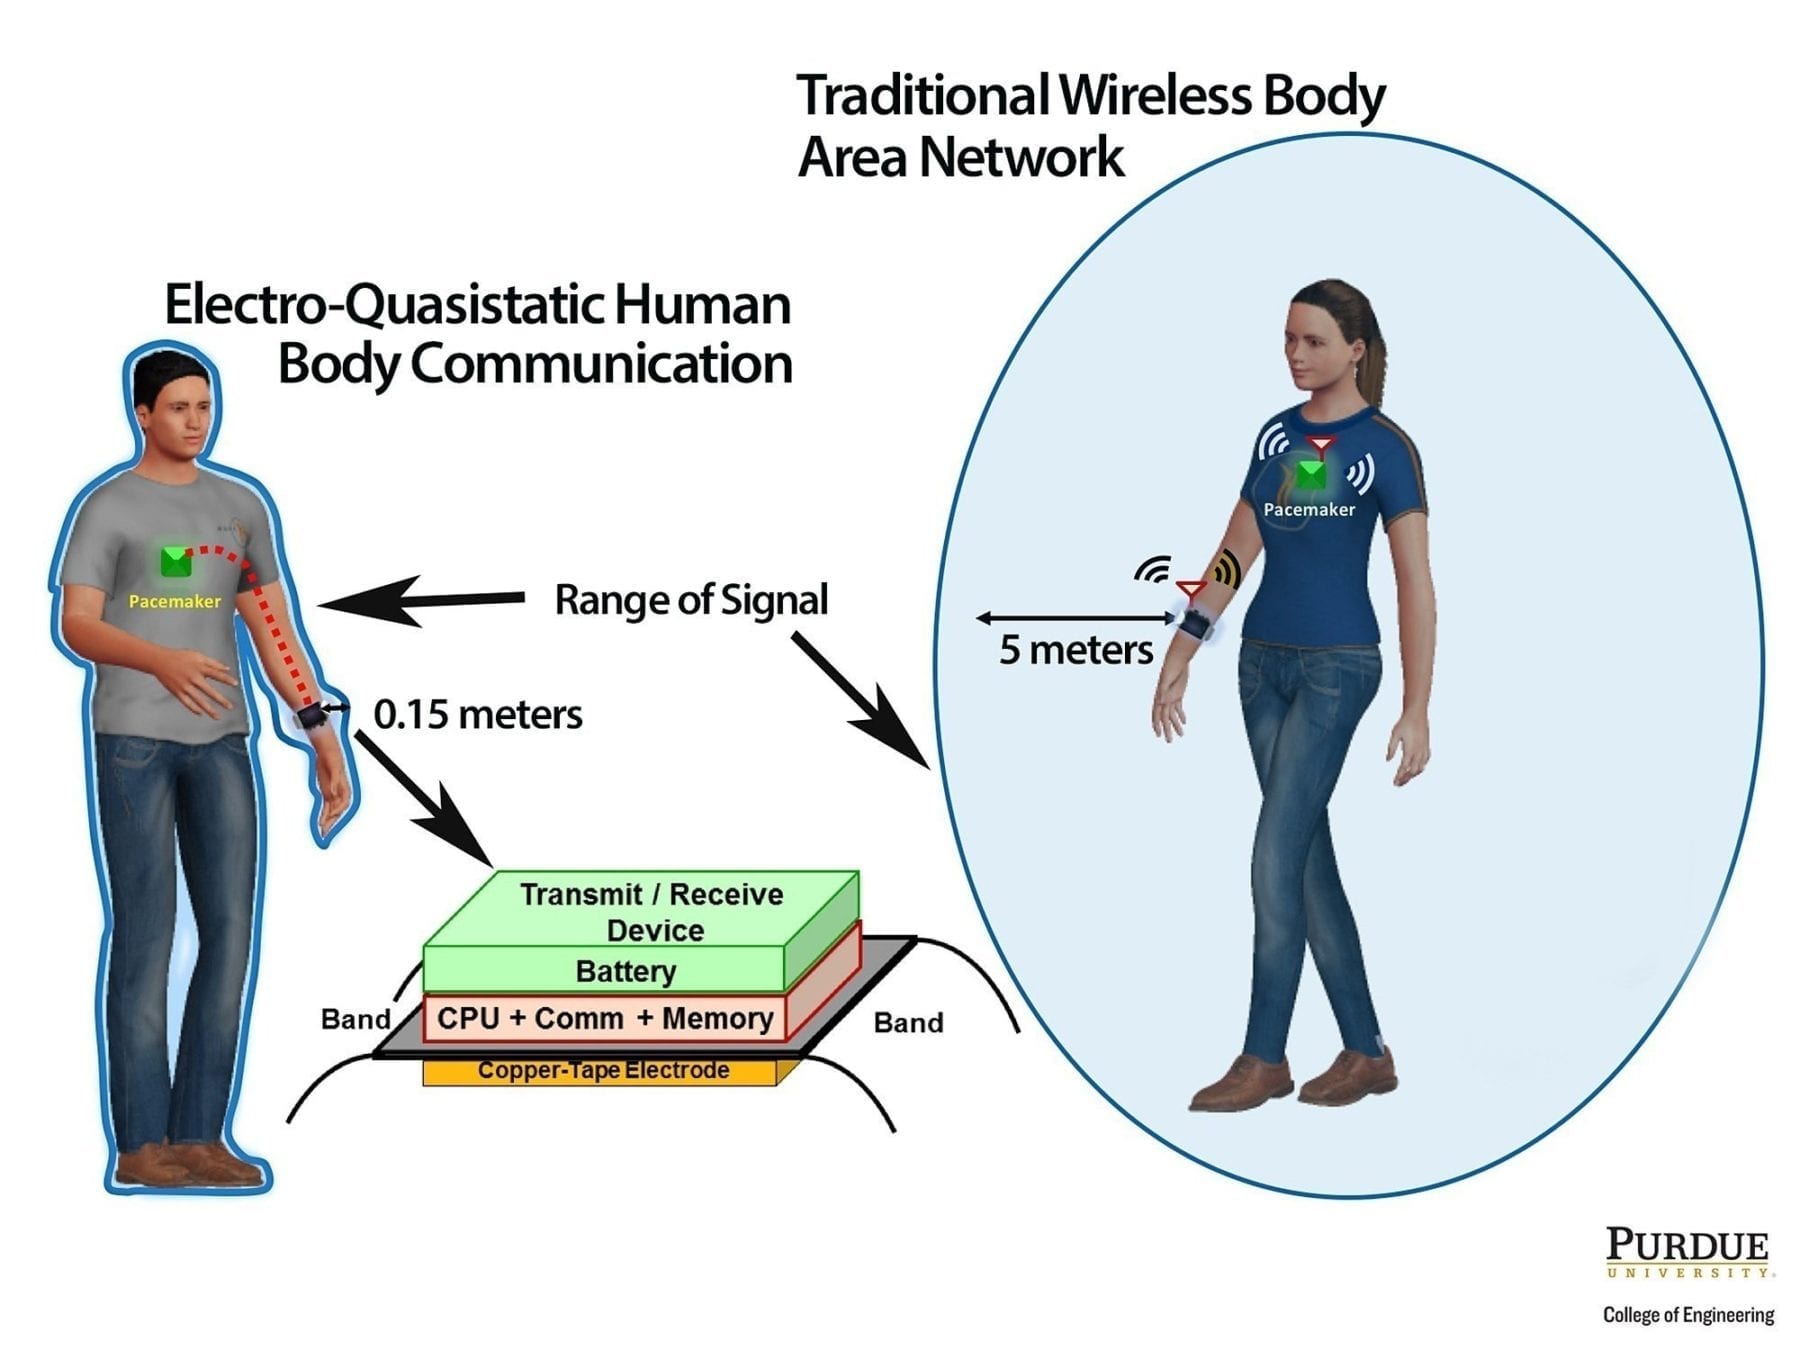 Protecting body-based medical tech from remote hacks before they happen